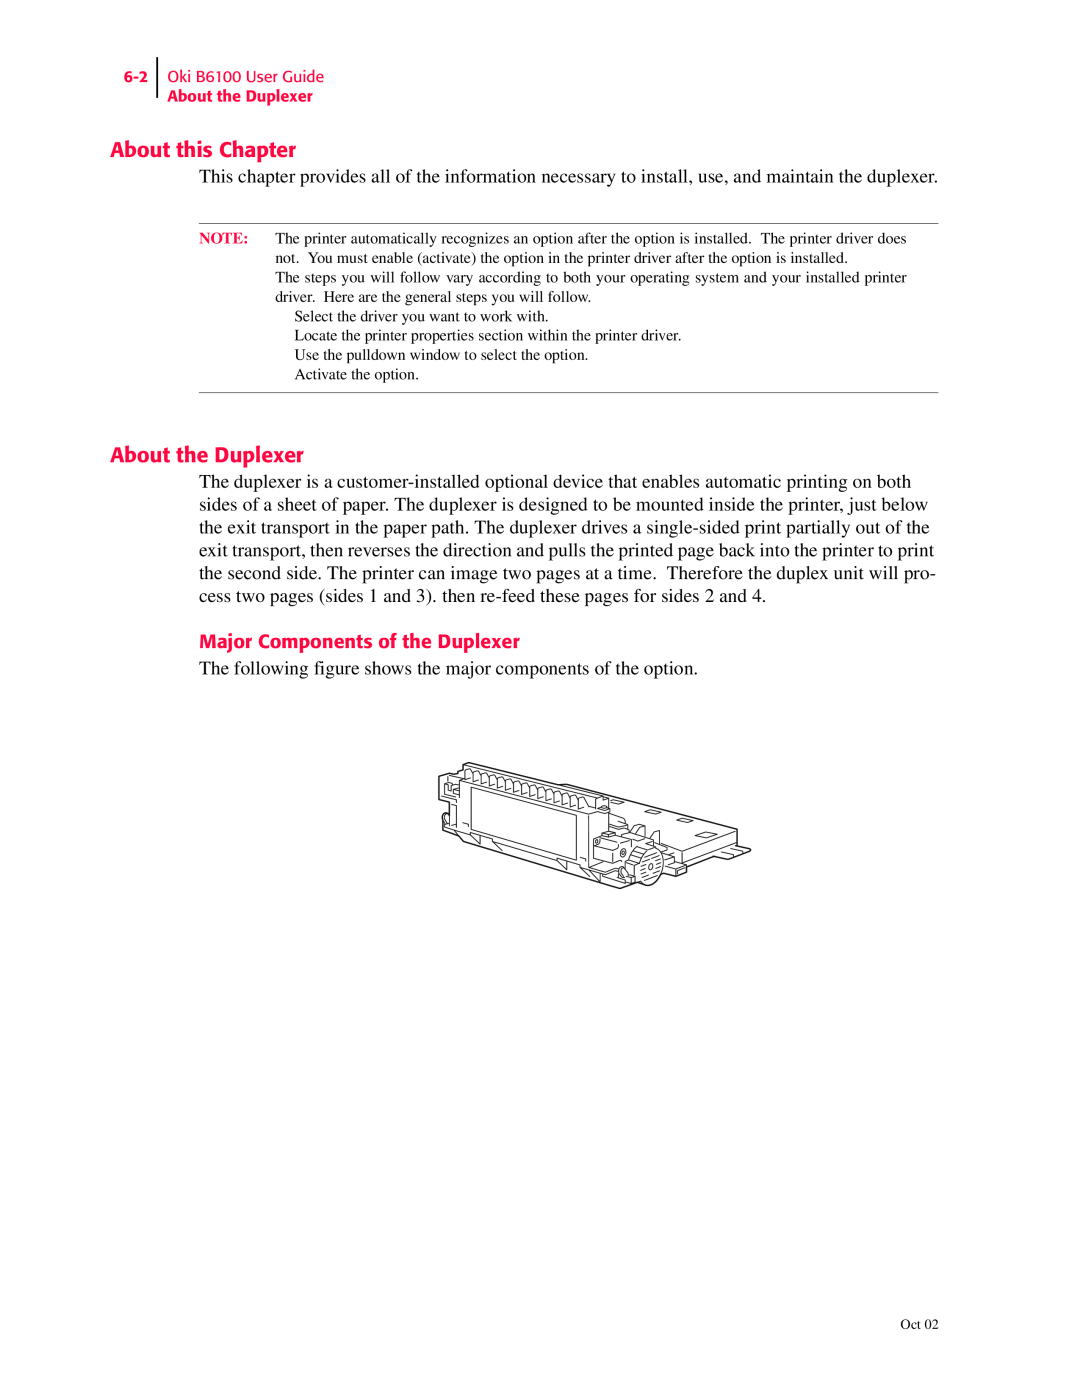 Oki manual About this Chapter, Major Components of the Duplexer, Oki B6100 User Guide About the Duplexer 